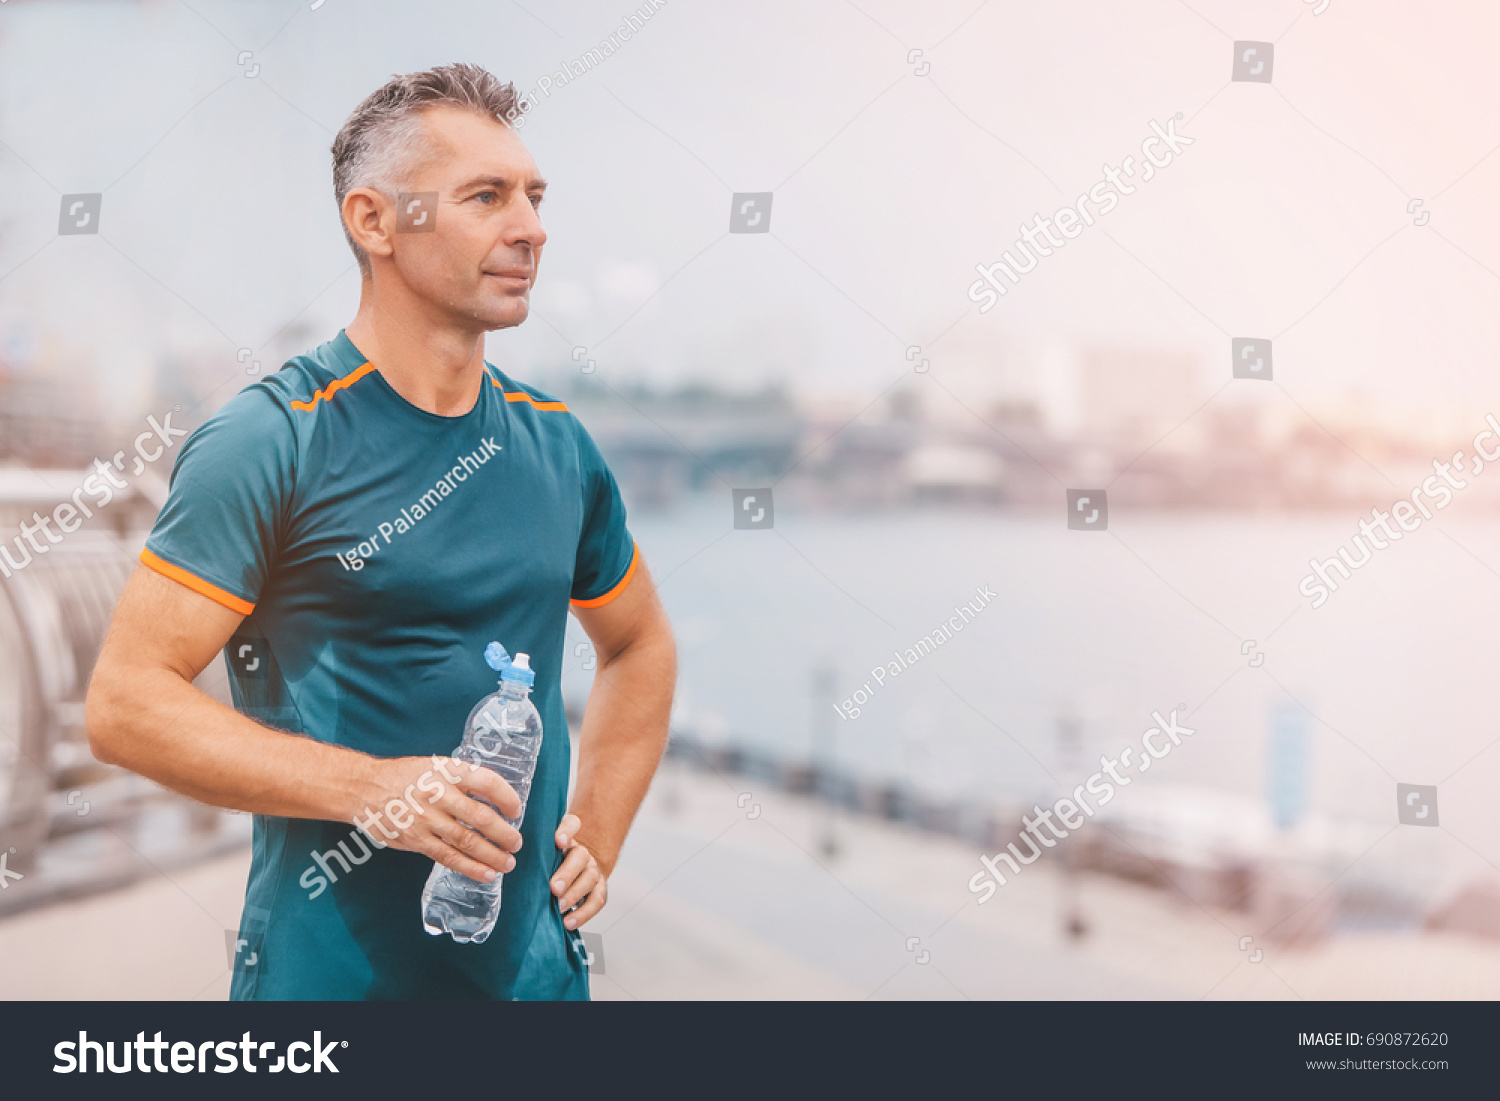 Portrait of healthy athletic middle aged man with fit body holding bottle of refreshing water, resting after workout or running. middle aged male with a drink after outdoor training.  #690872620